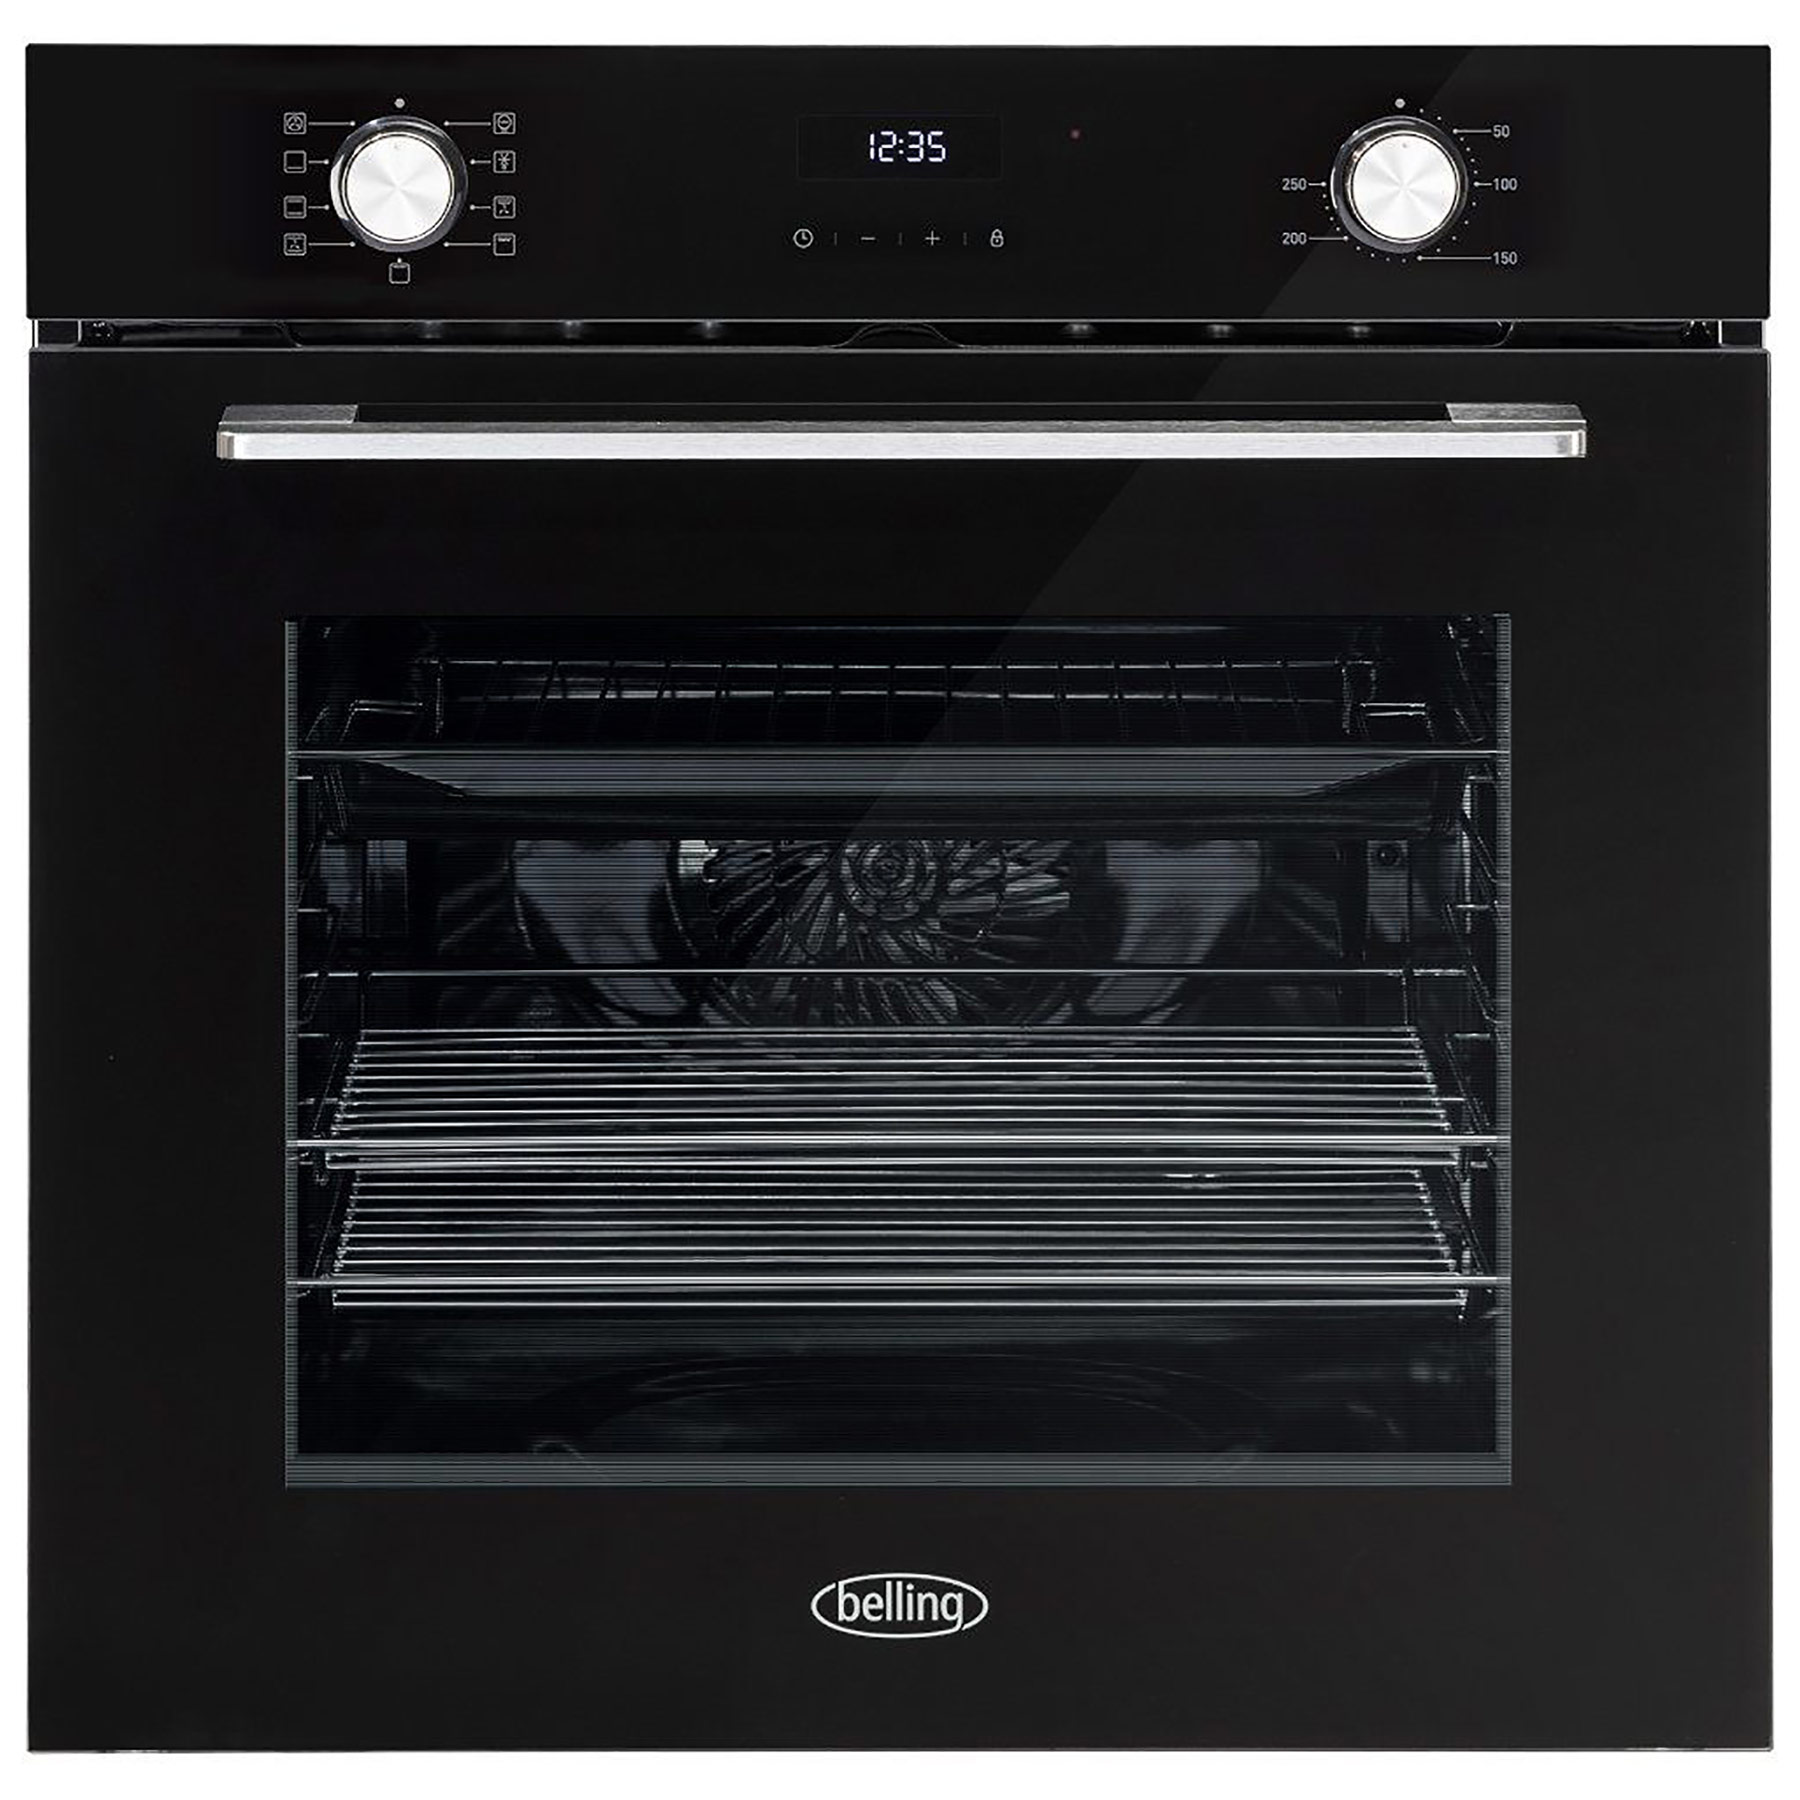 Image of Belling 444411626 Built In Electric Single Oven in Black 72L A Rated